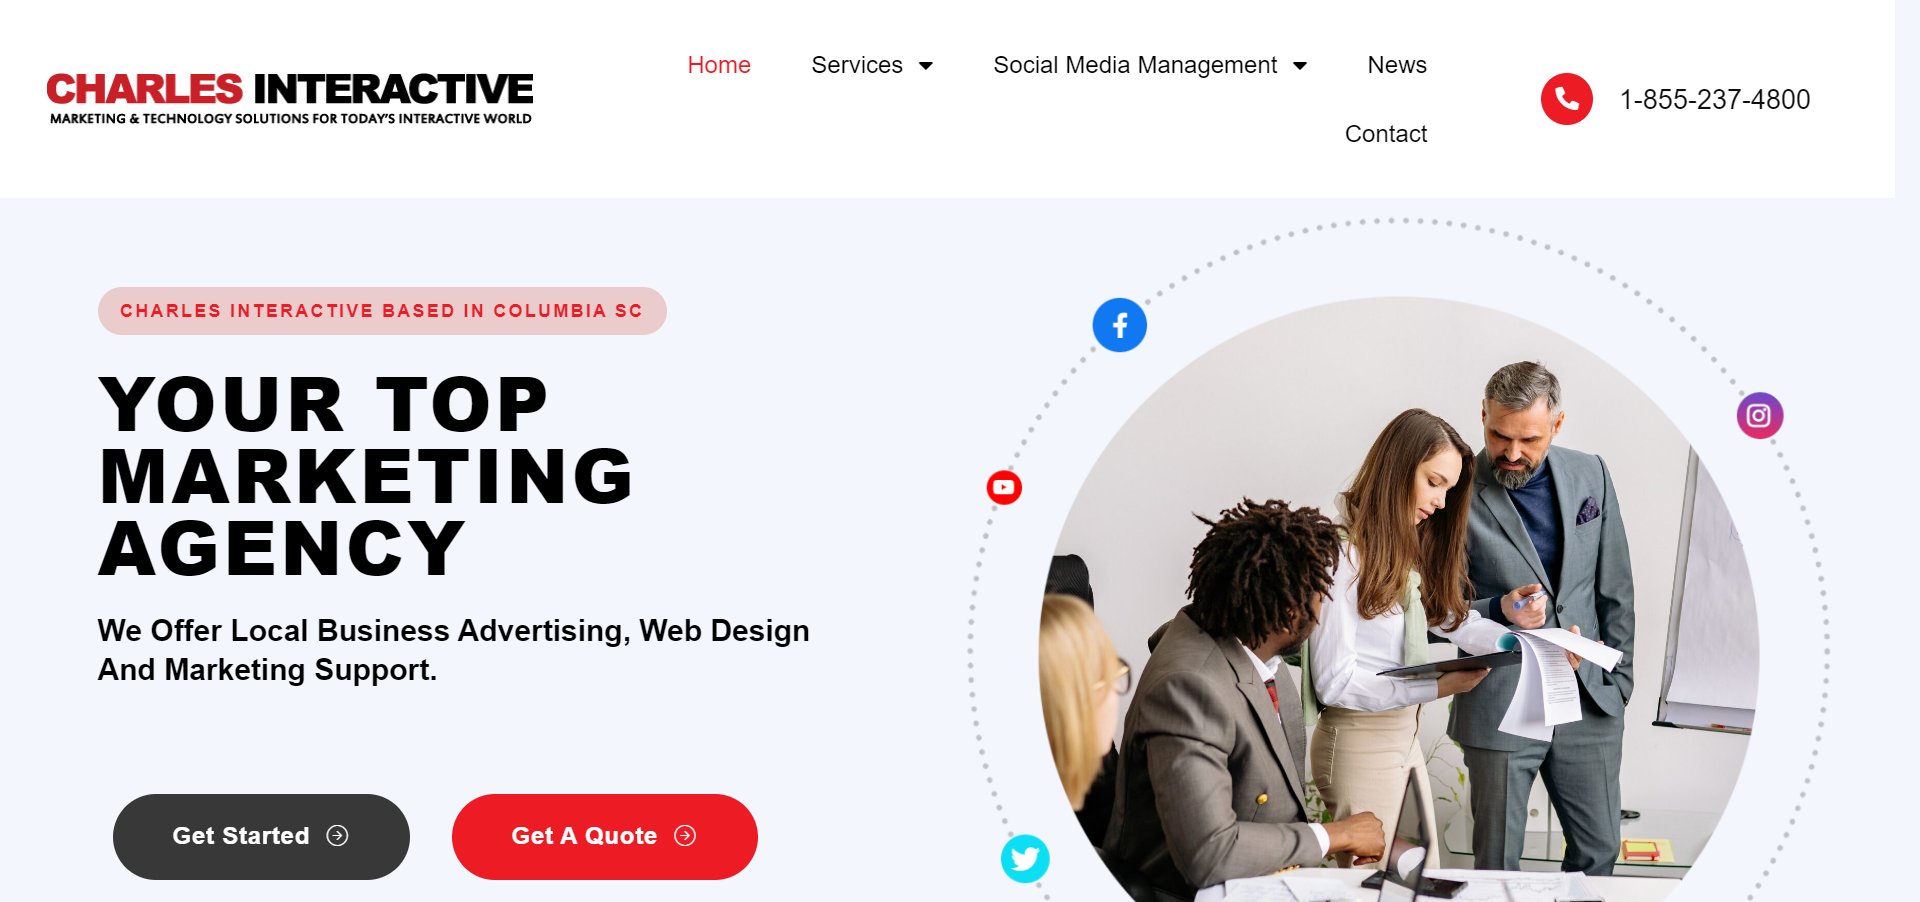 CHARLES INTERACTIVE WEB DESIGN AGENCY IN COLUMBIA SC